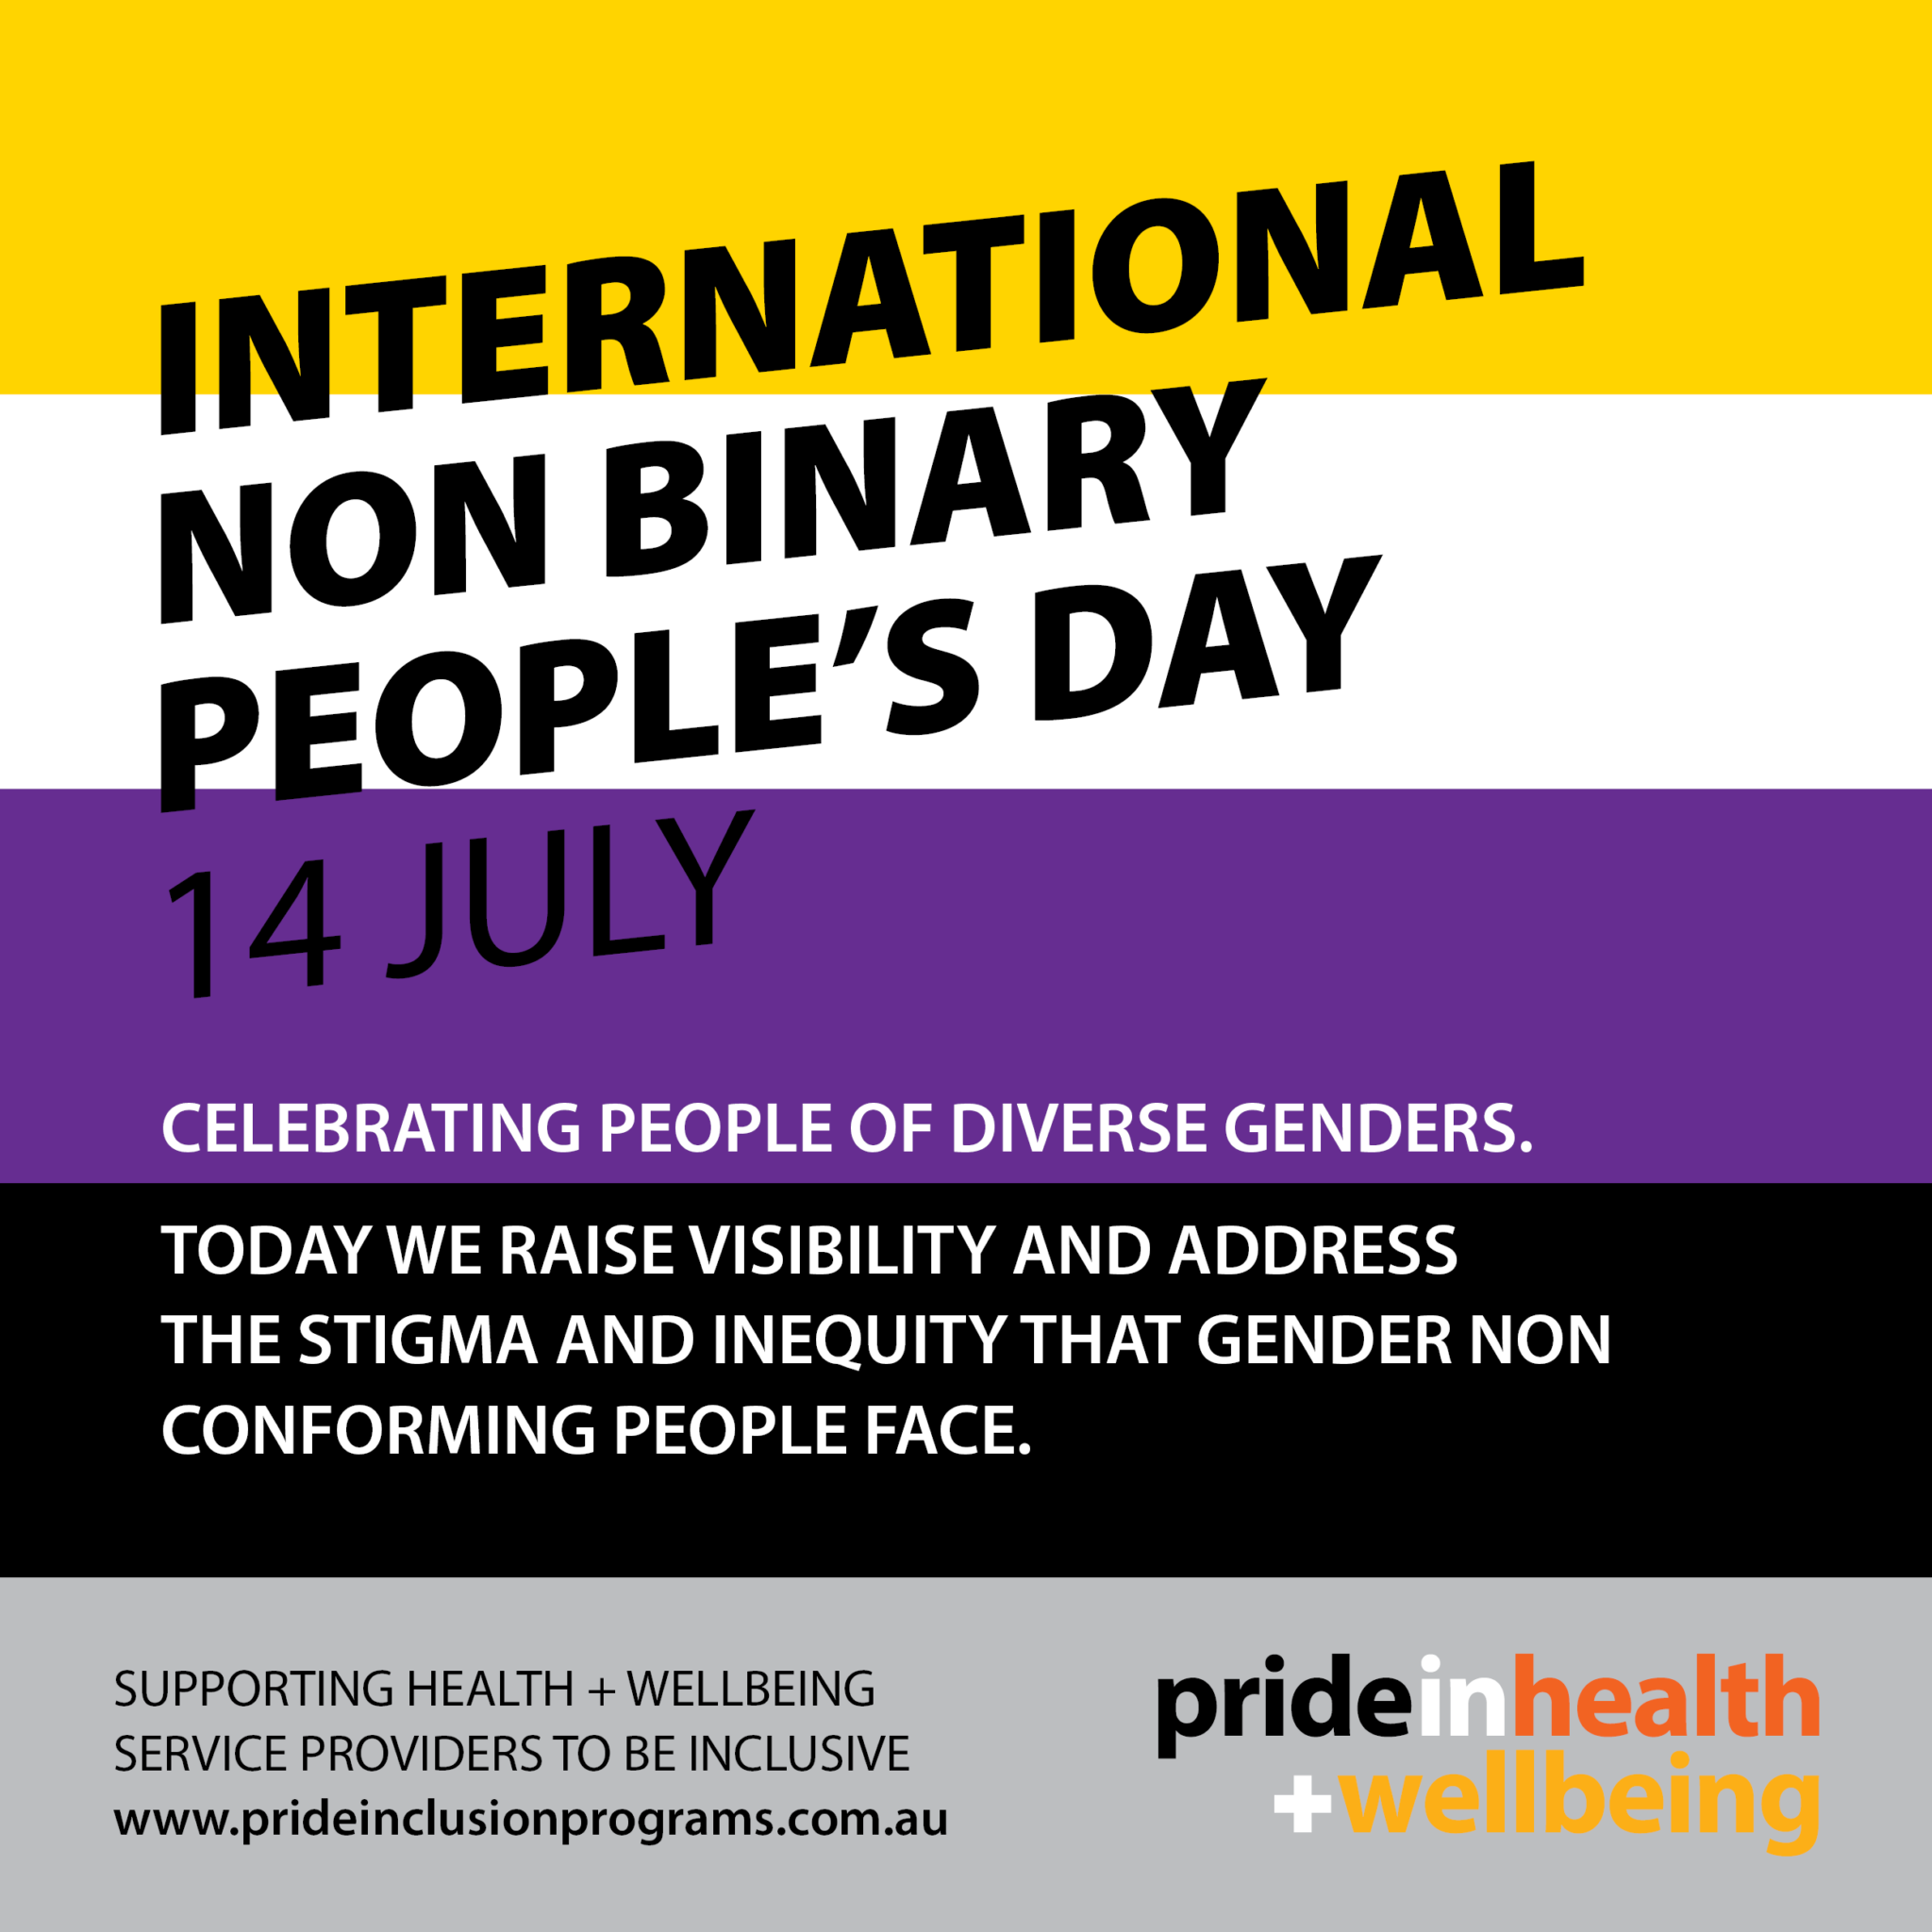 International NonBinary People's Day Pride in Health + Wellbeing